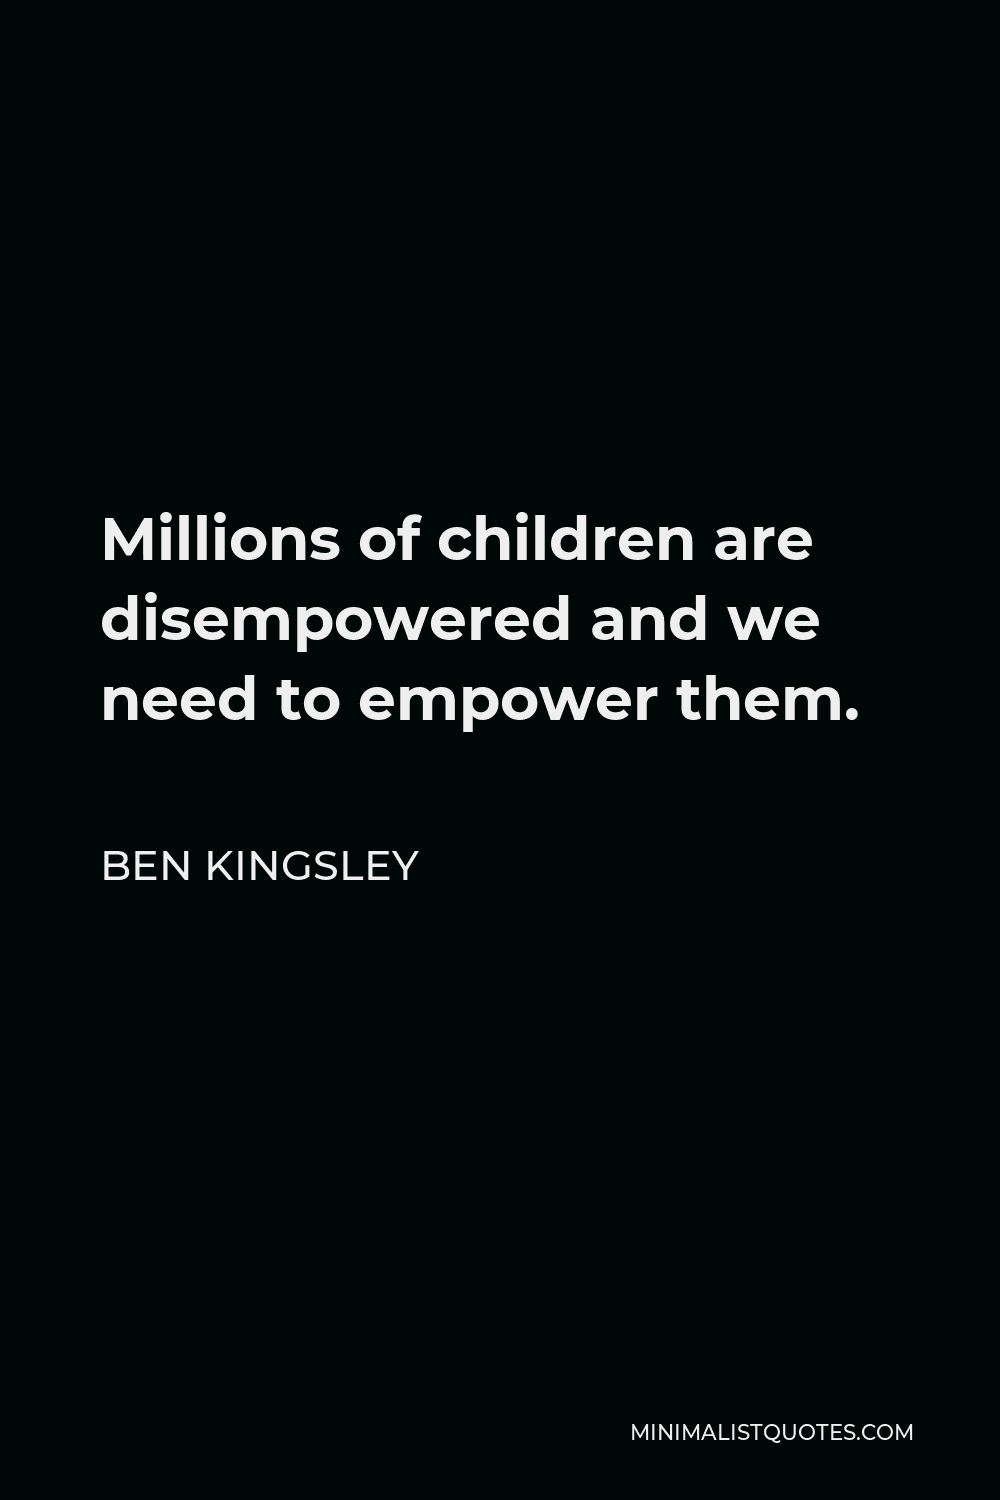 Ben Kingsley Quote - Millions of children are disempowered and we need to empower them.